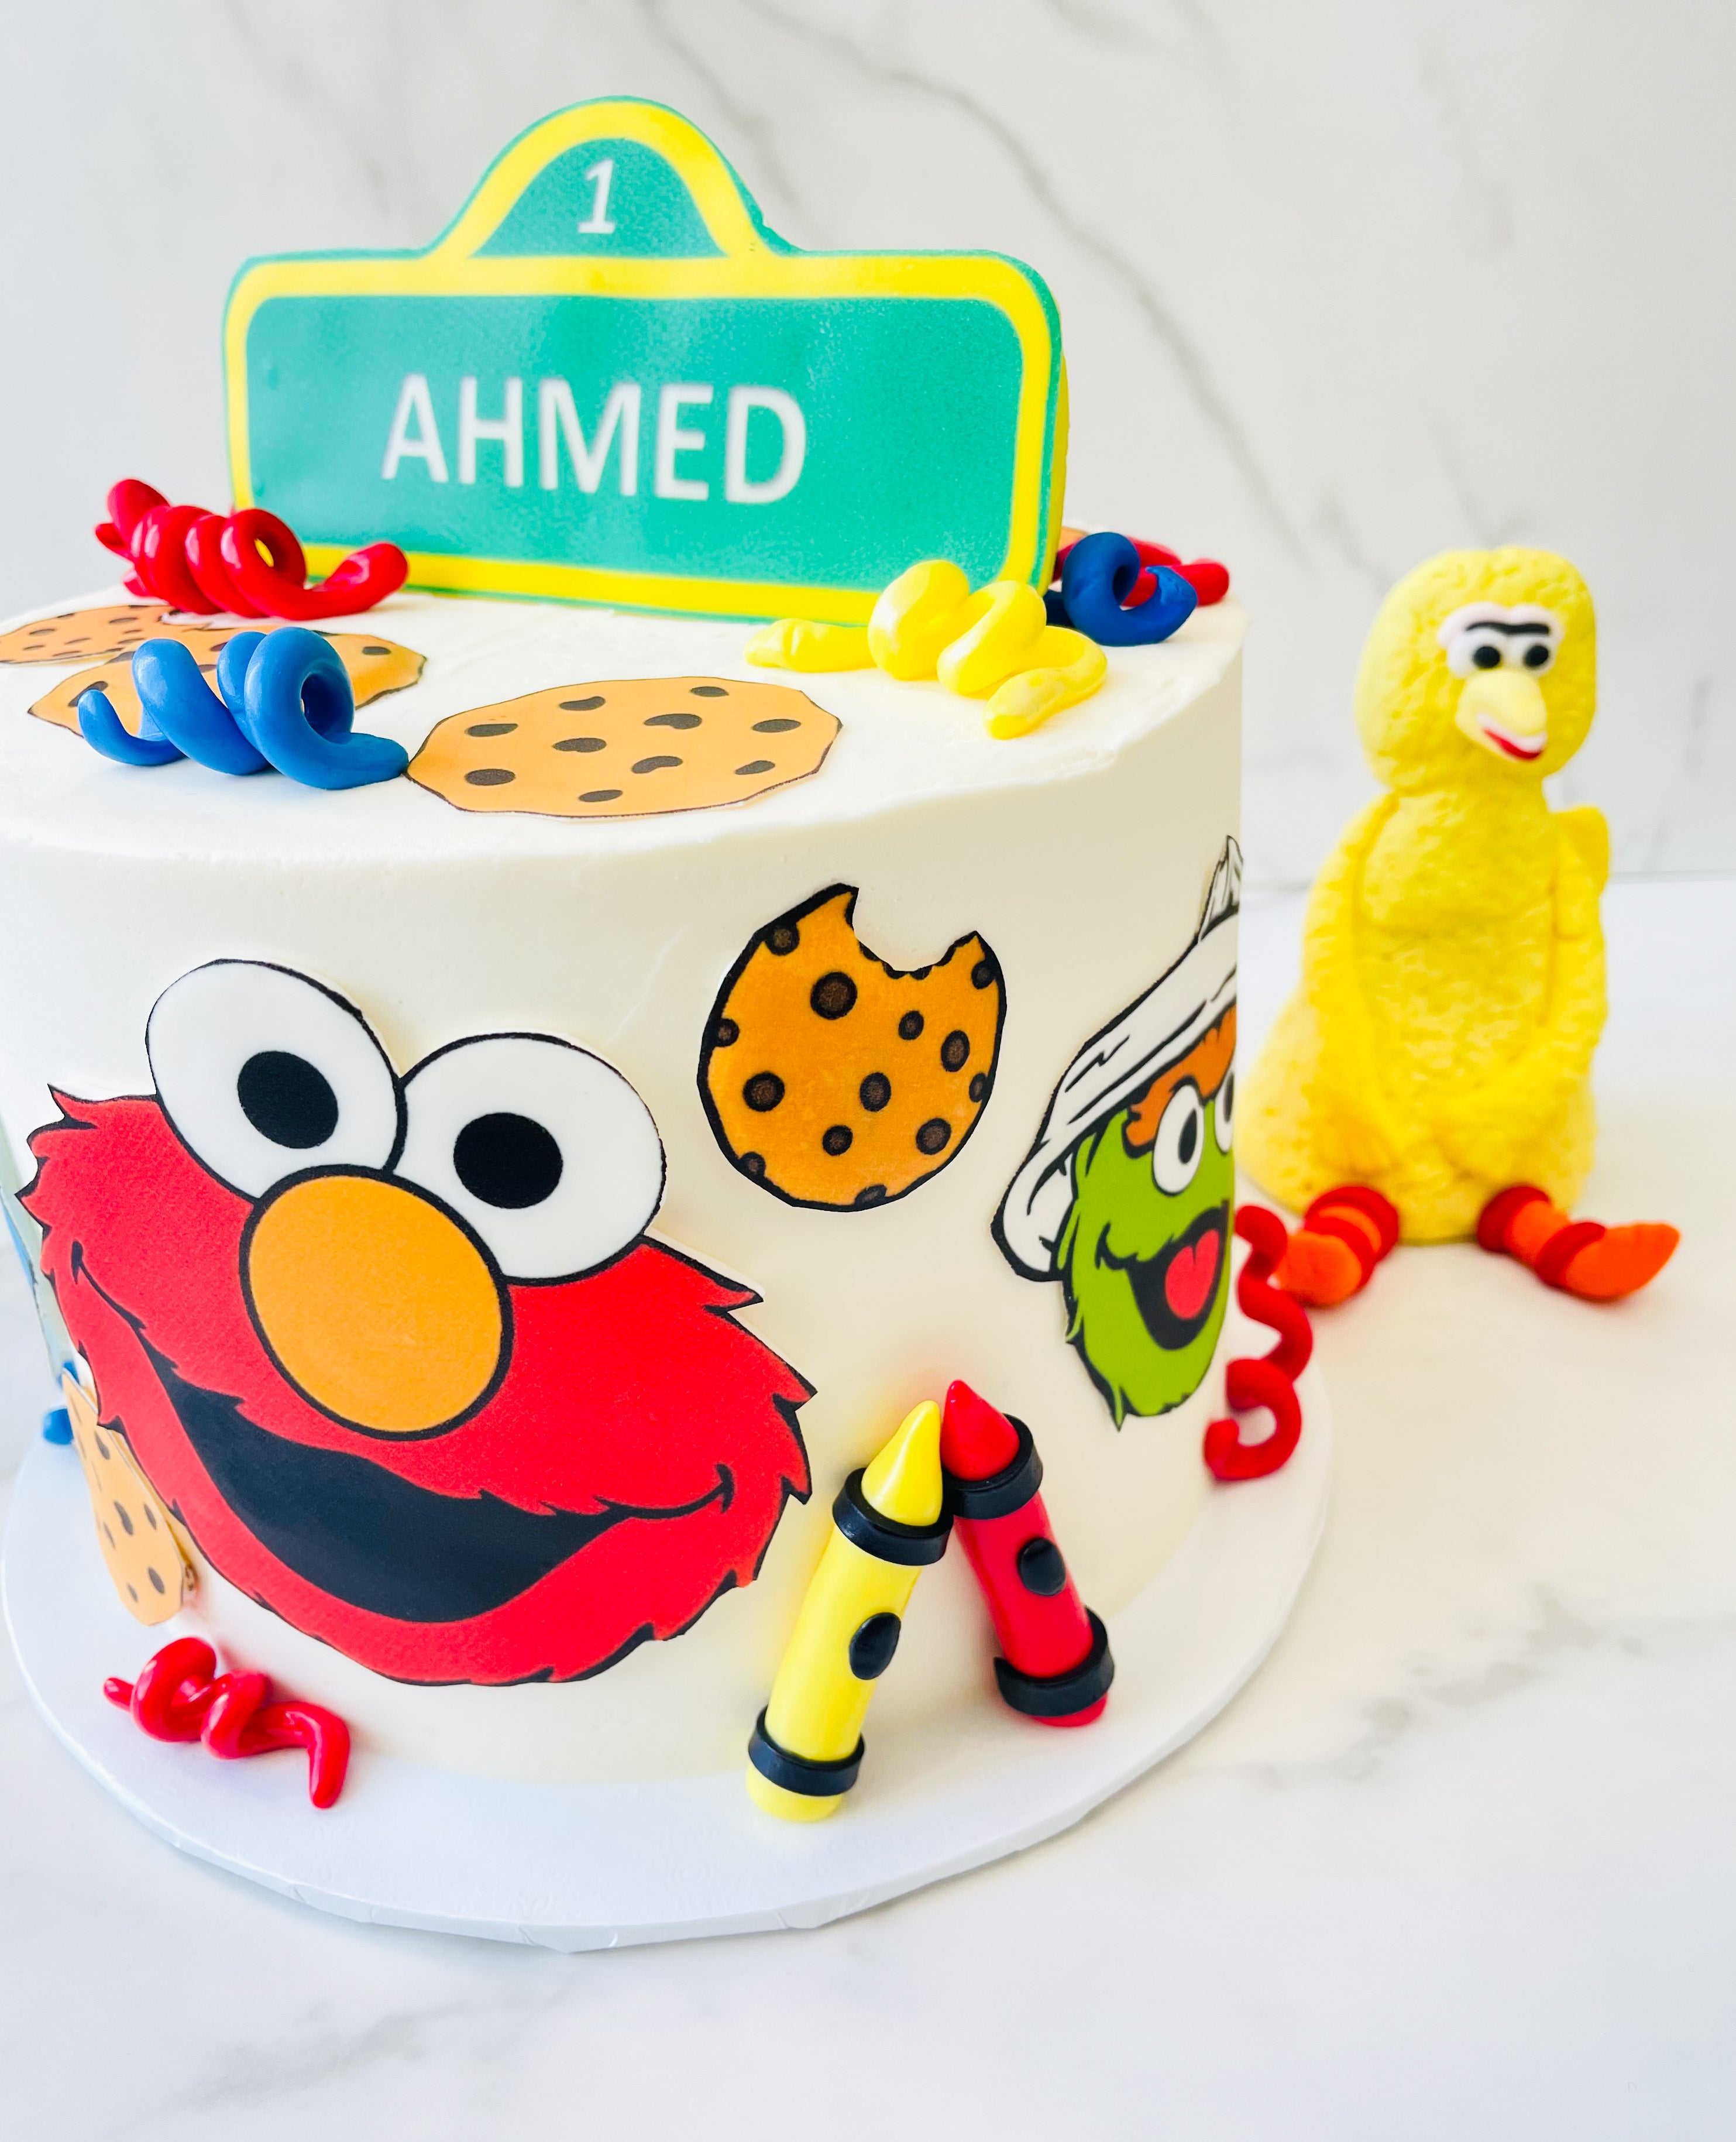 How to make an Elmo Cake (without mold) - The Food Charlatan